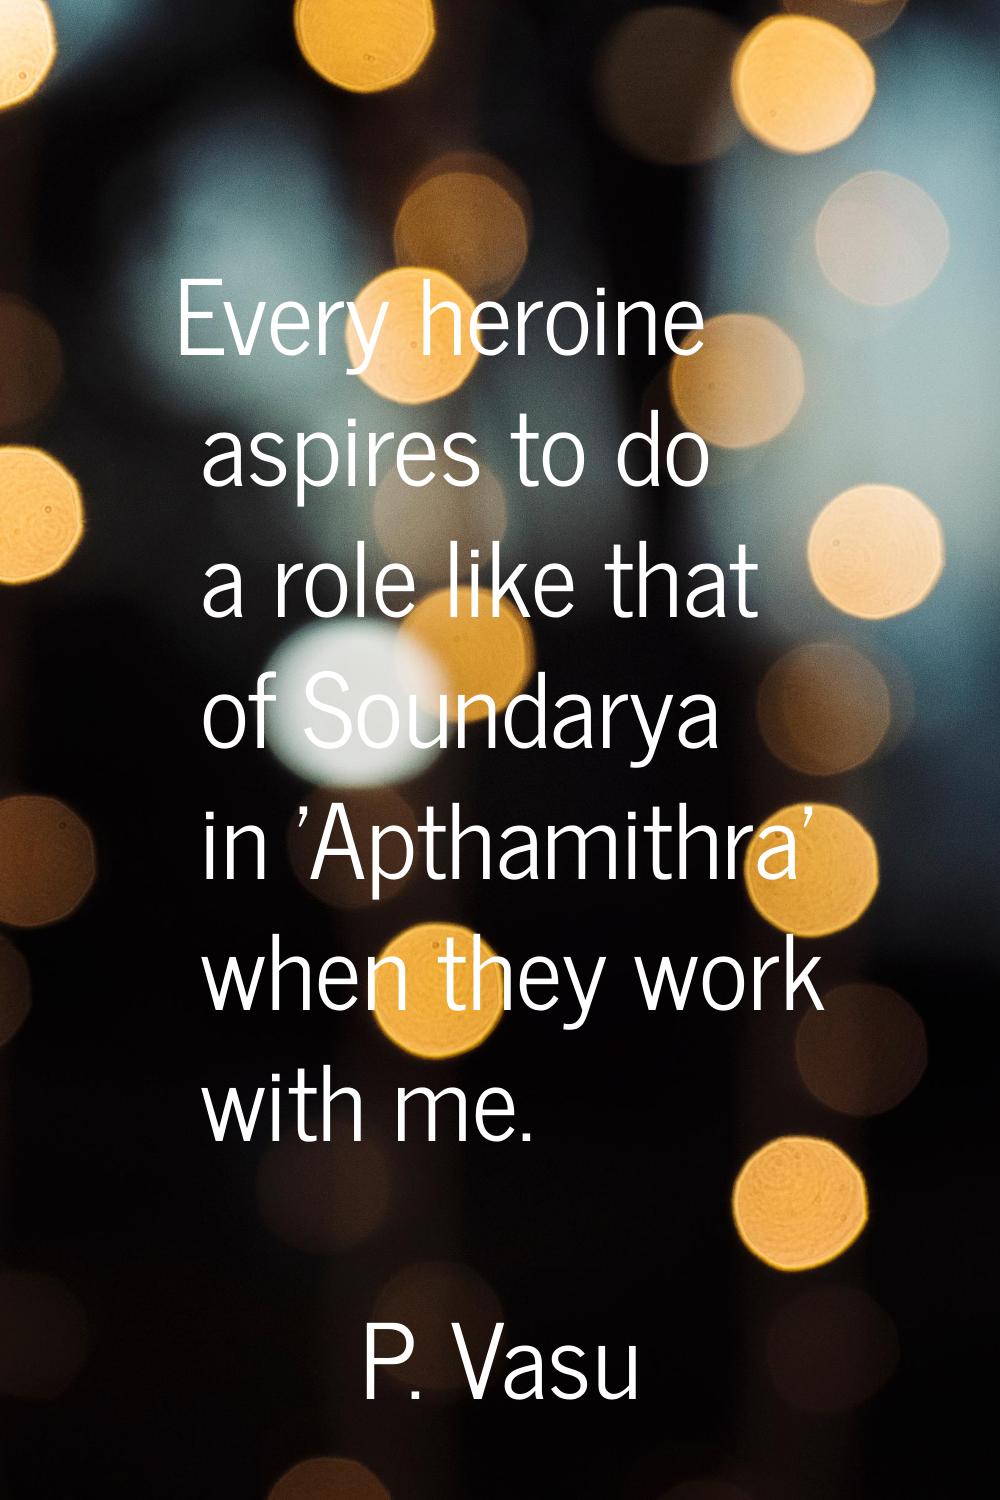 Every heroine aspires to do a role like that of Soundarya in 'Apthamithra' when they work with me.